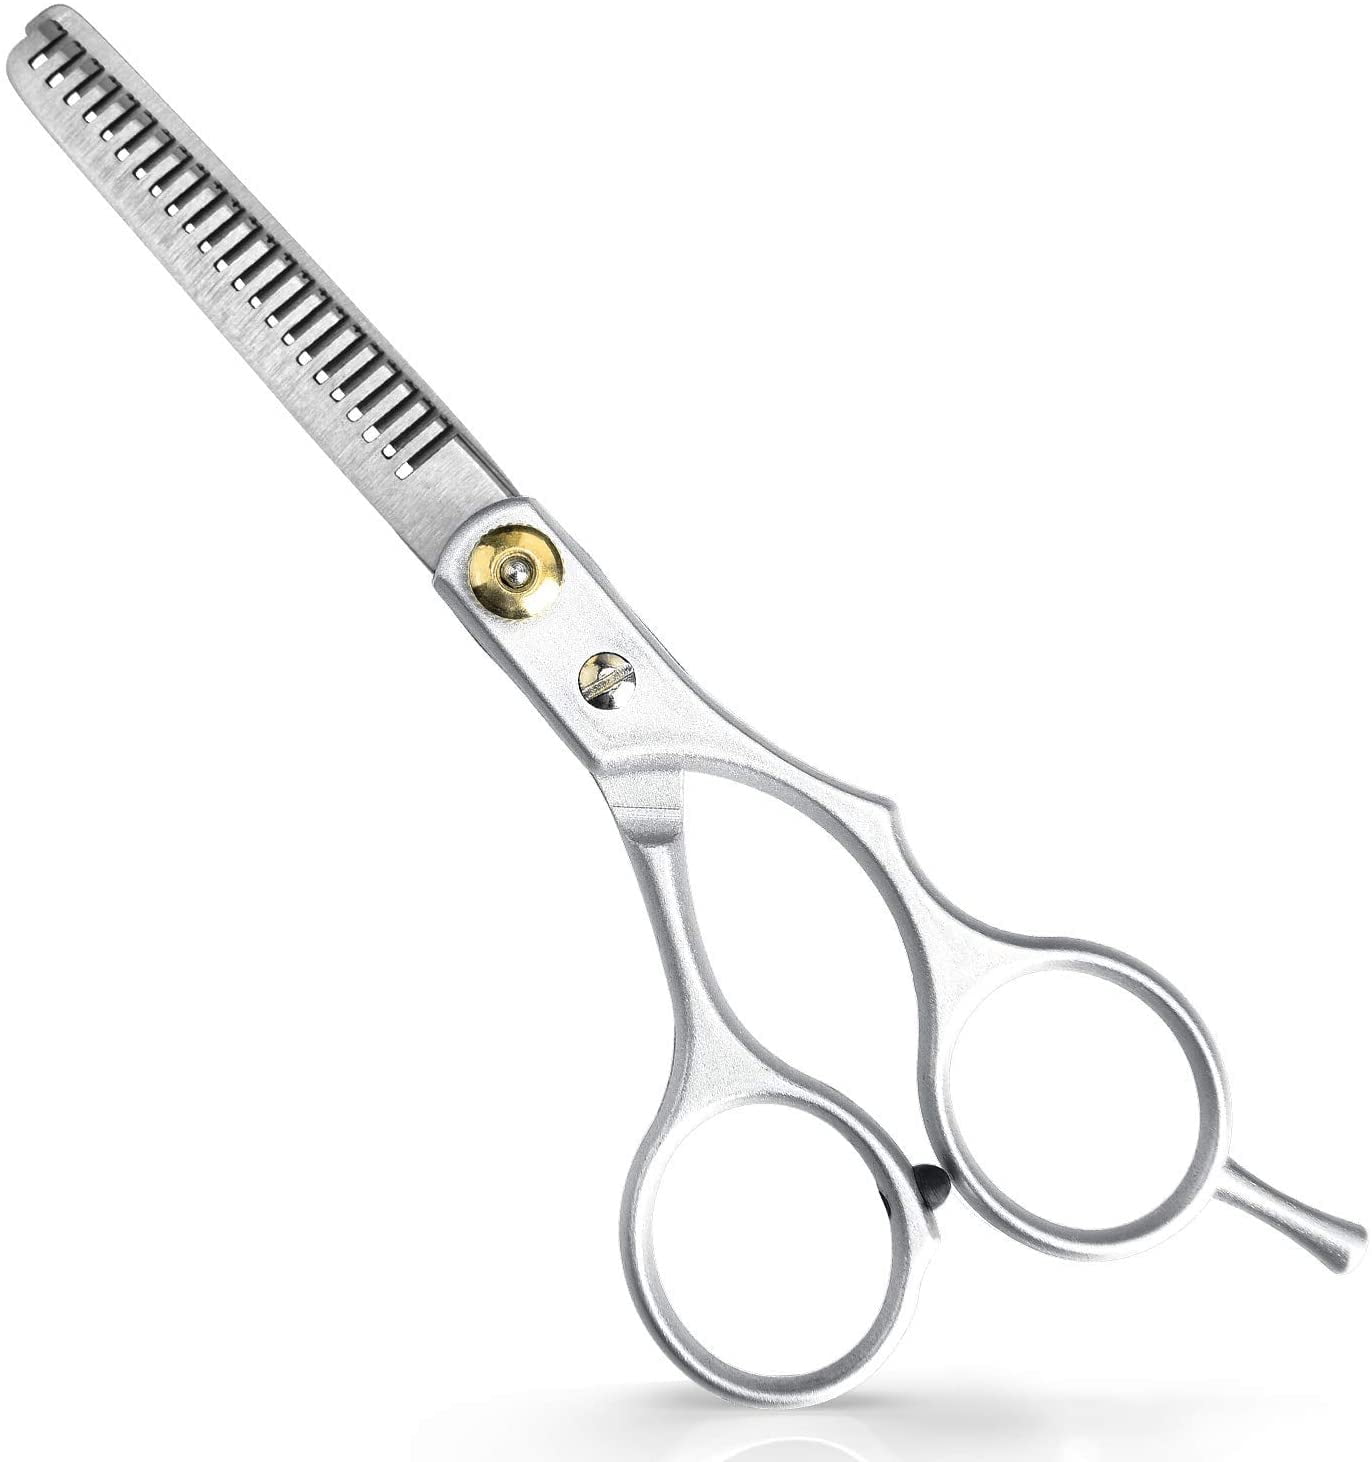 Chainplus Professional Thinning Shears 6.1 Inch with Extremely